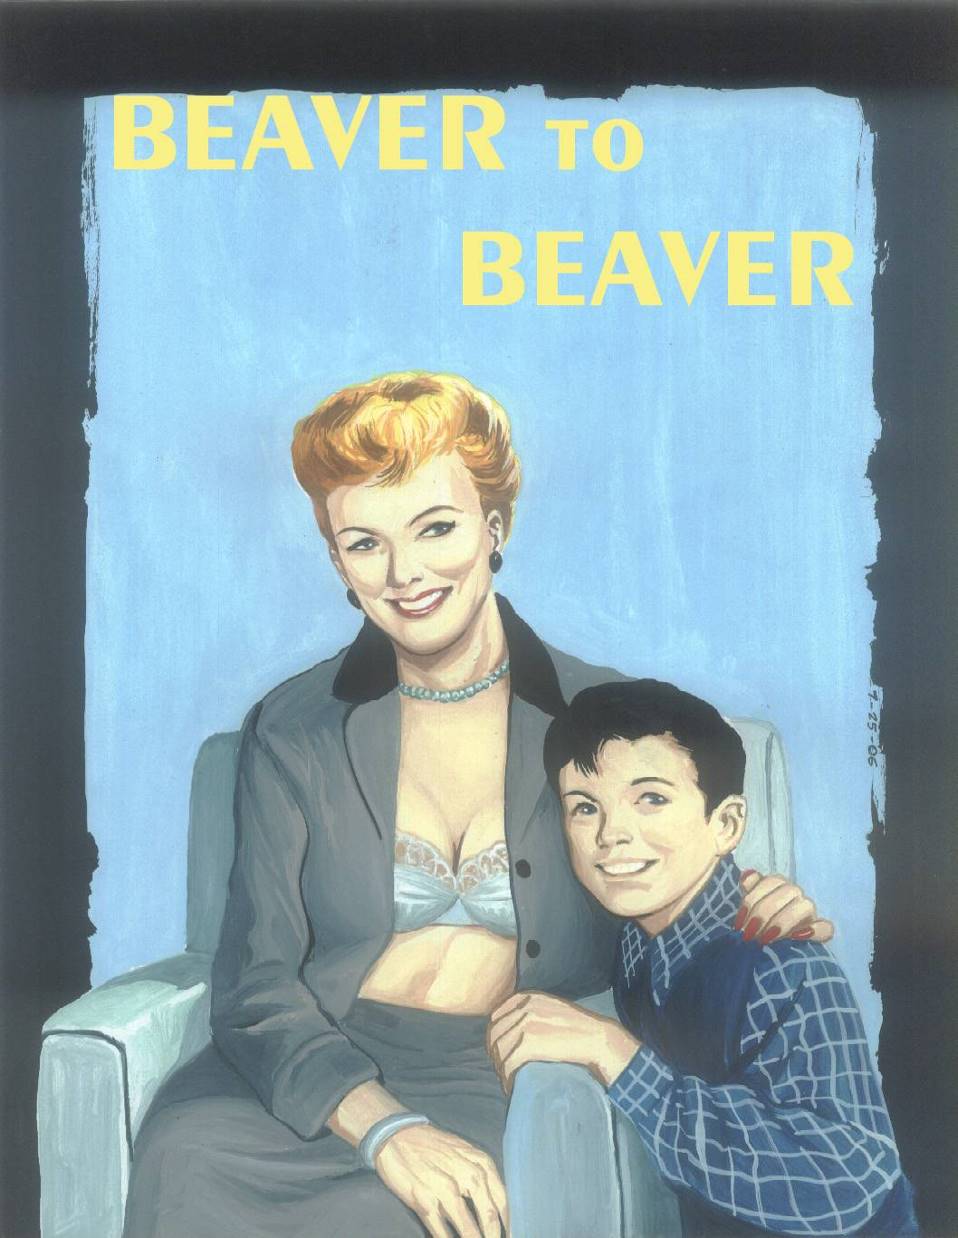 The evil is in the Amber Lynn's beaver